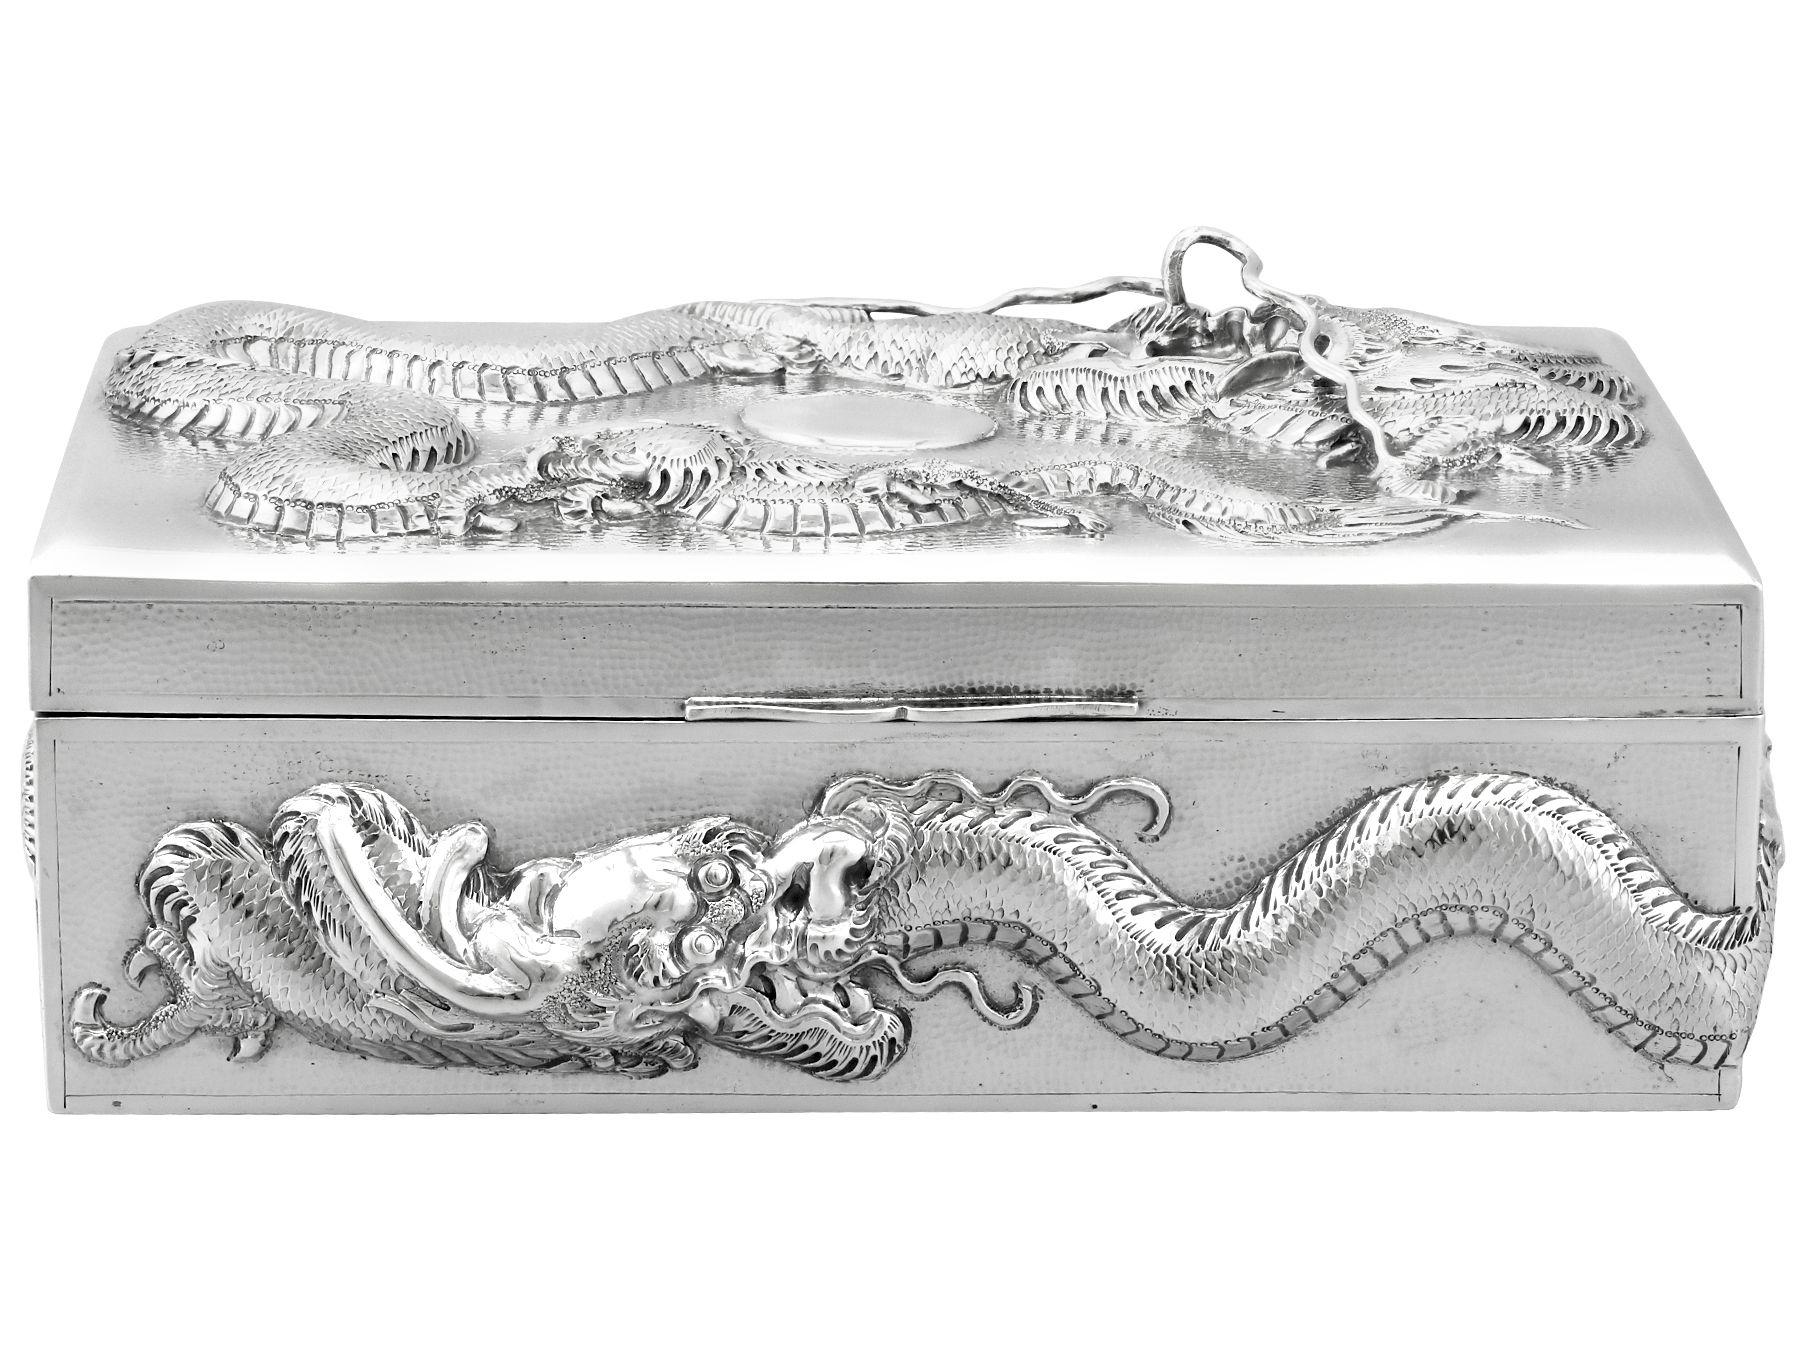 An exceptional, fine and impressive antique Chinese Export silver box; an addition to our collection of boxes and cases.

This exceptional antique Chinese Export Silver (CES) cigarette box has a plain rectangular form.

The surface of the body